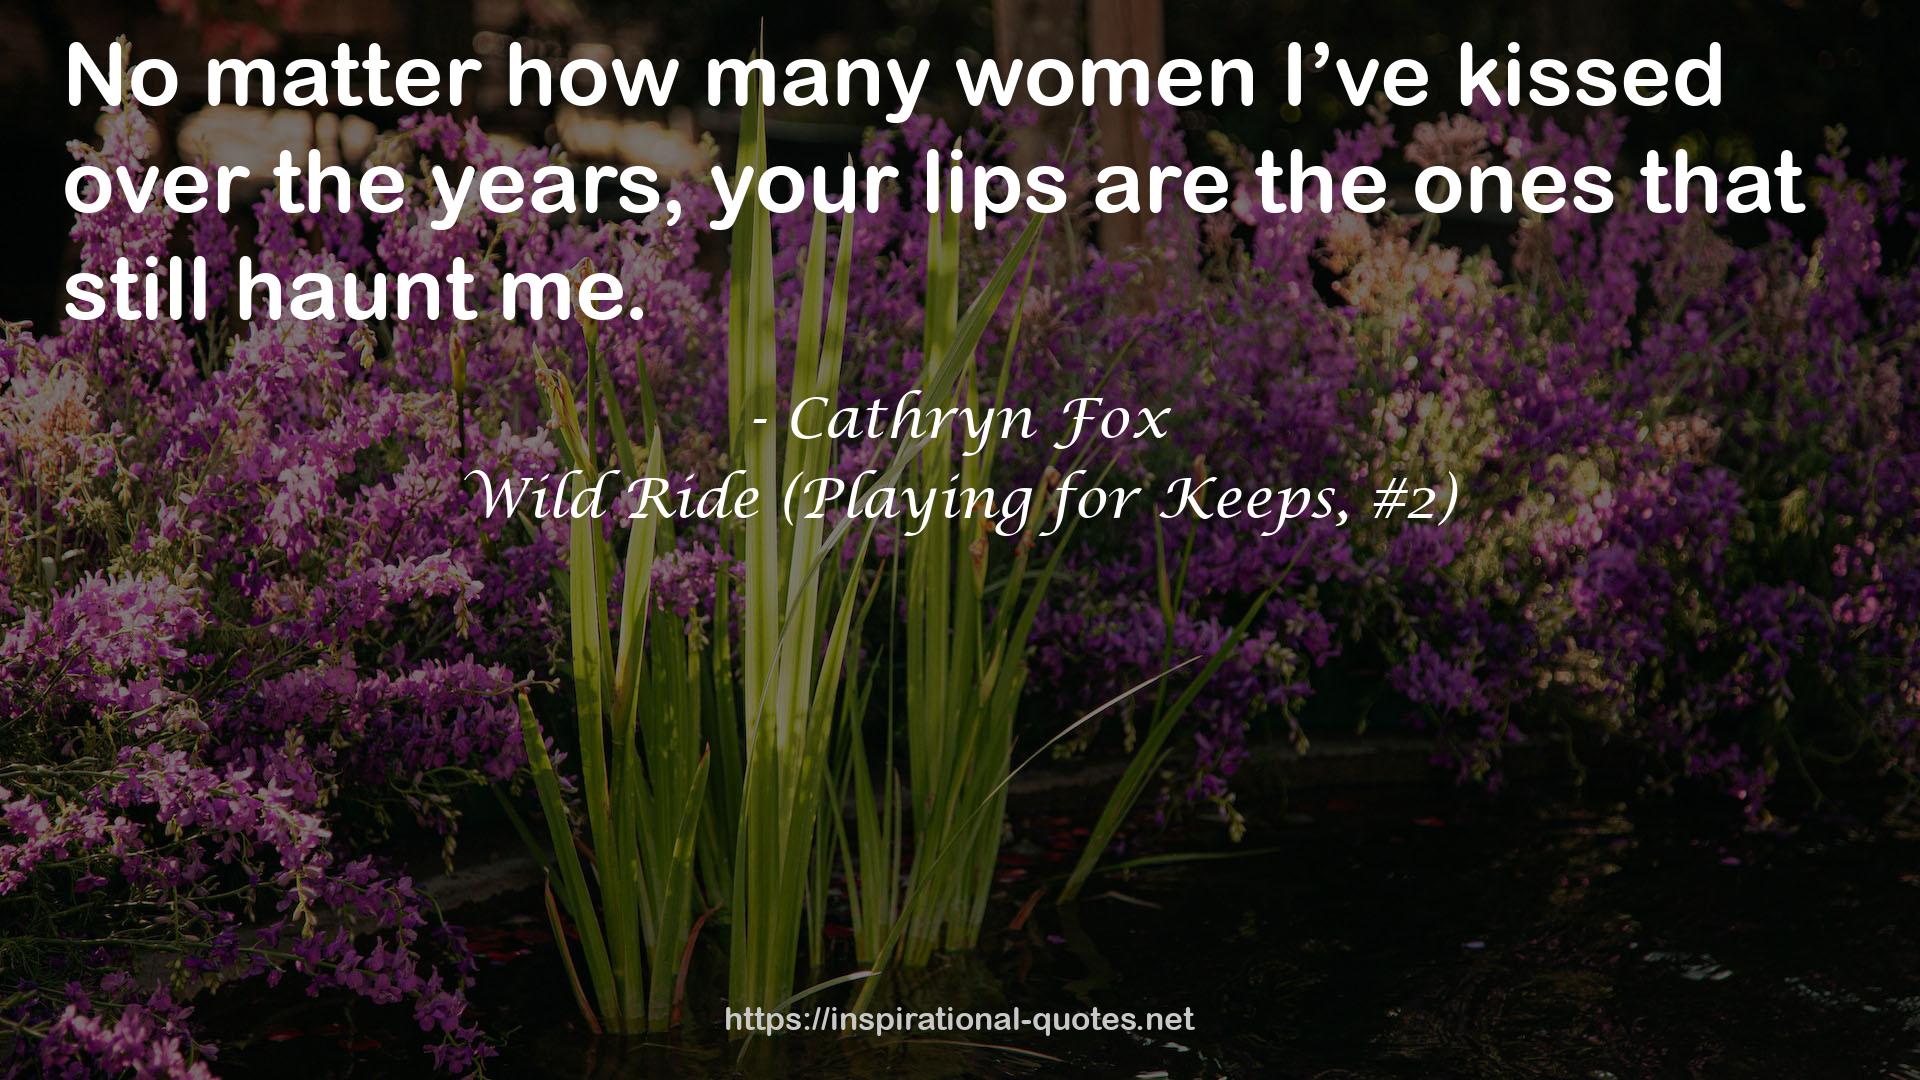 Cathryn Fox QUOTES